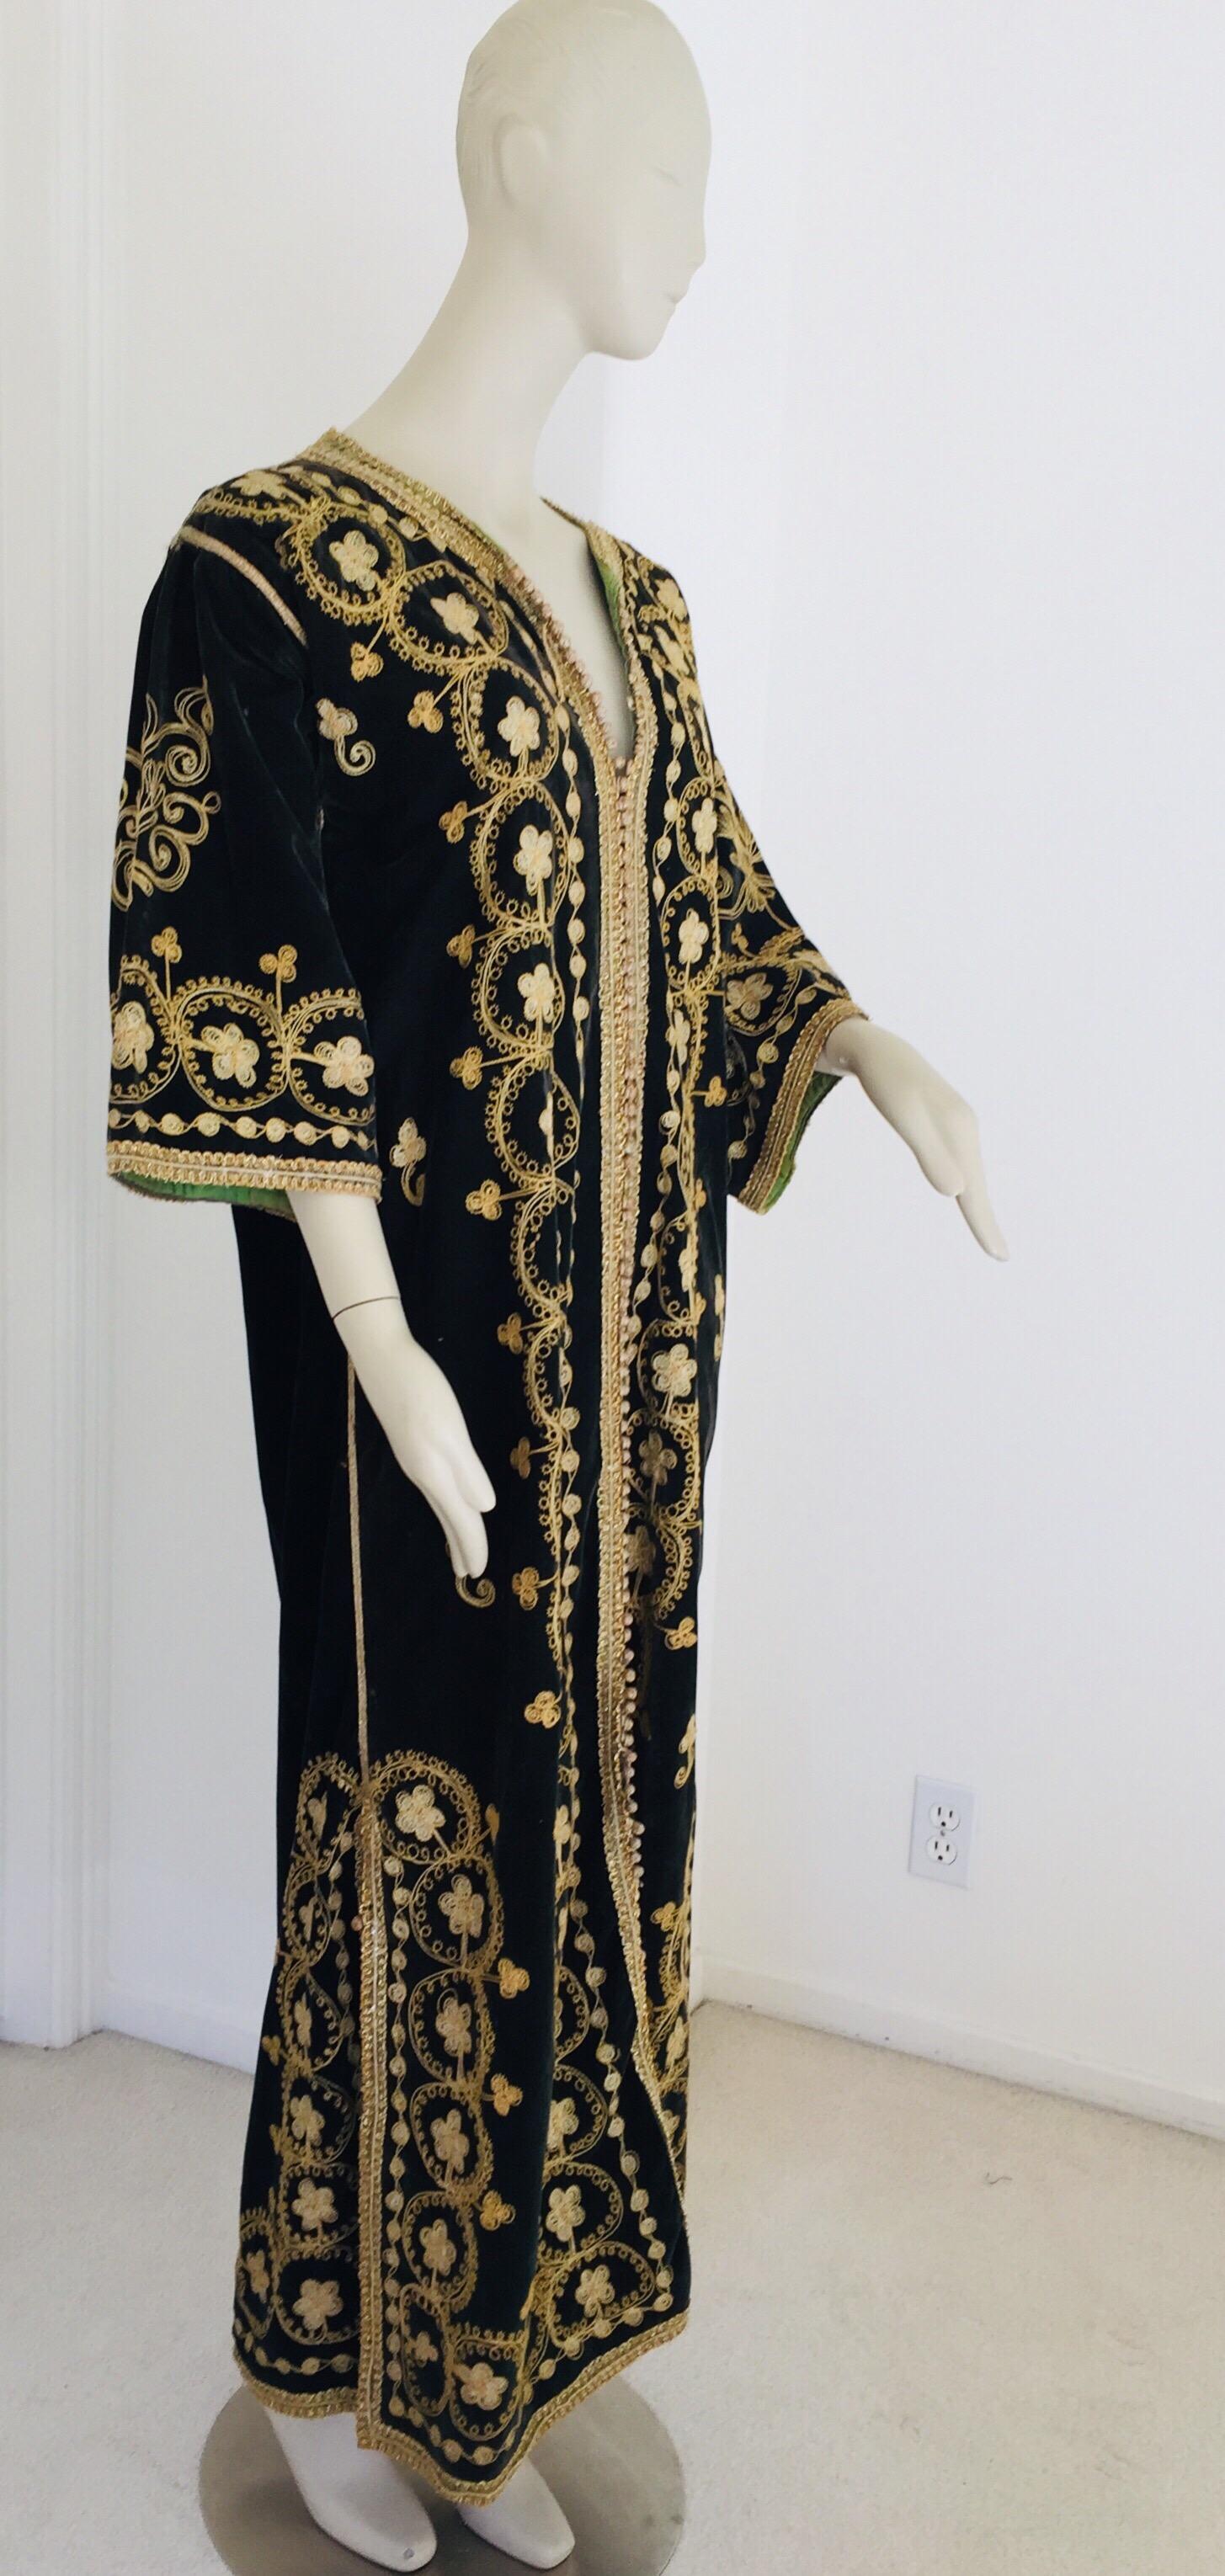 Amazing vintage caftan, black silk velvet heavily hand embroidered with gold threads, circa 1960s
The black velvet kaftan is embroidered and embellished entirely by hand.
The kaftan features a traditional neckline, with side slits and gently fluted